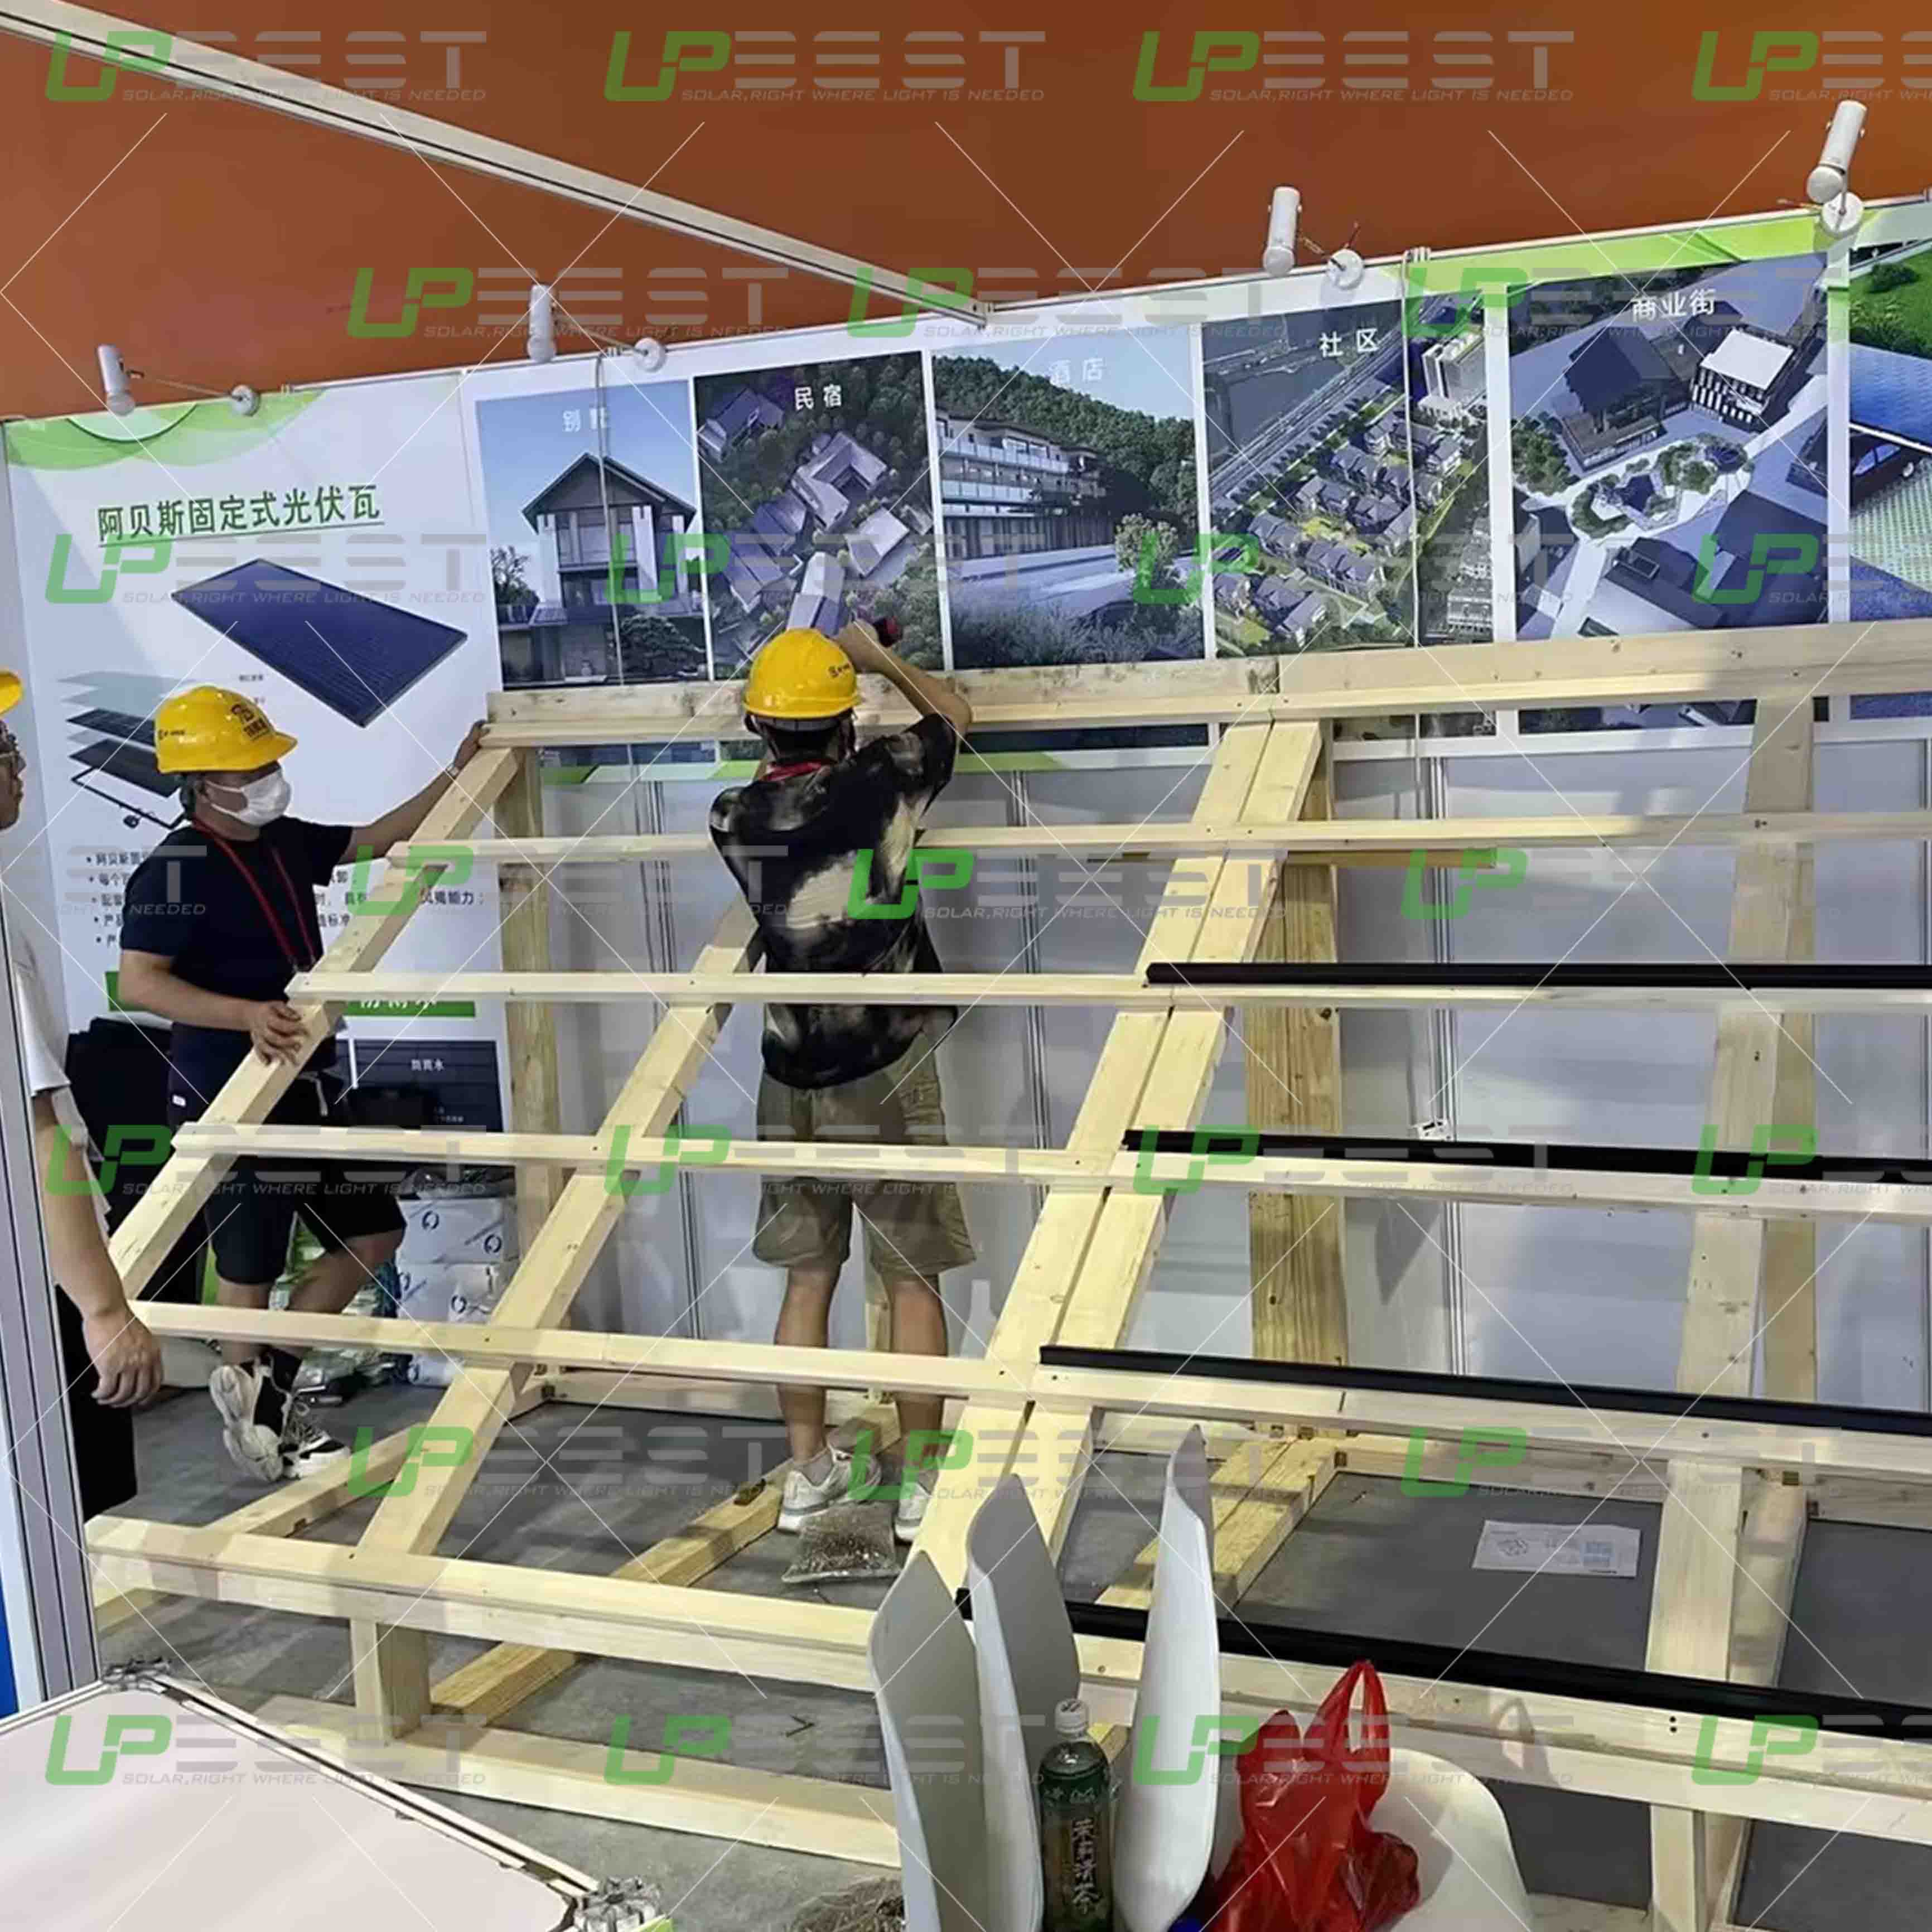 Upbest Showcases Cutting-Edge BIPV Panels at The 16th China Int'l Intergreted Housing Industry & Building  Industrialization Expo